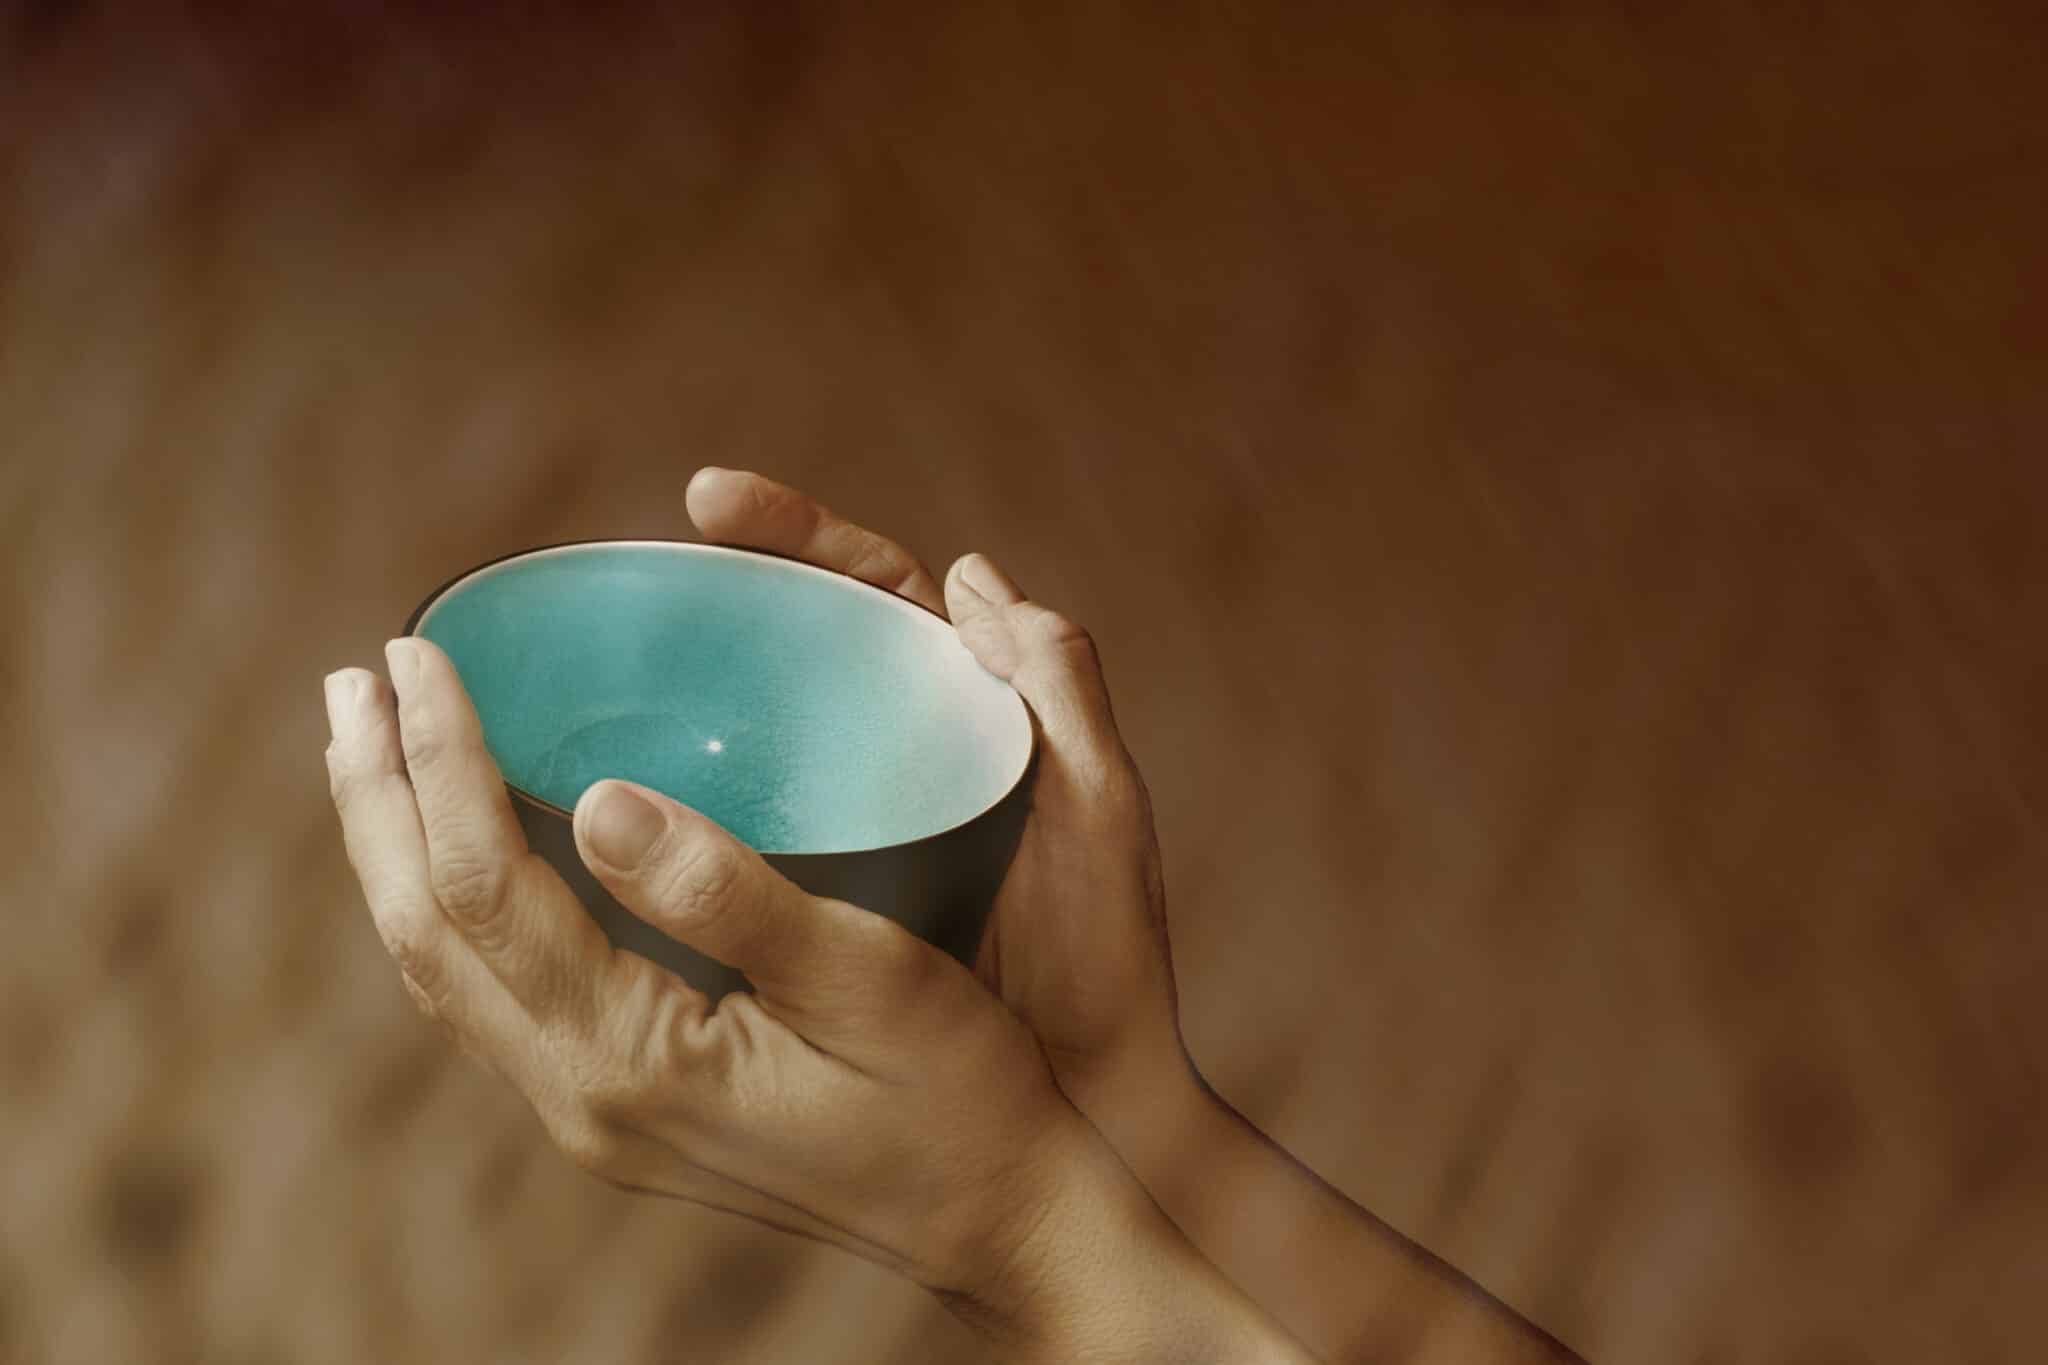 Hands holding up an empty bowl symbolizing want and poverty